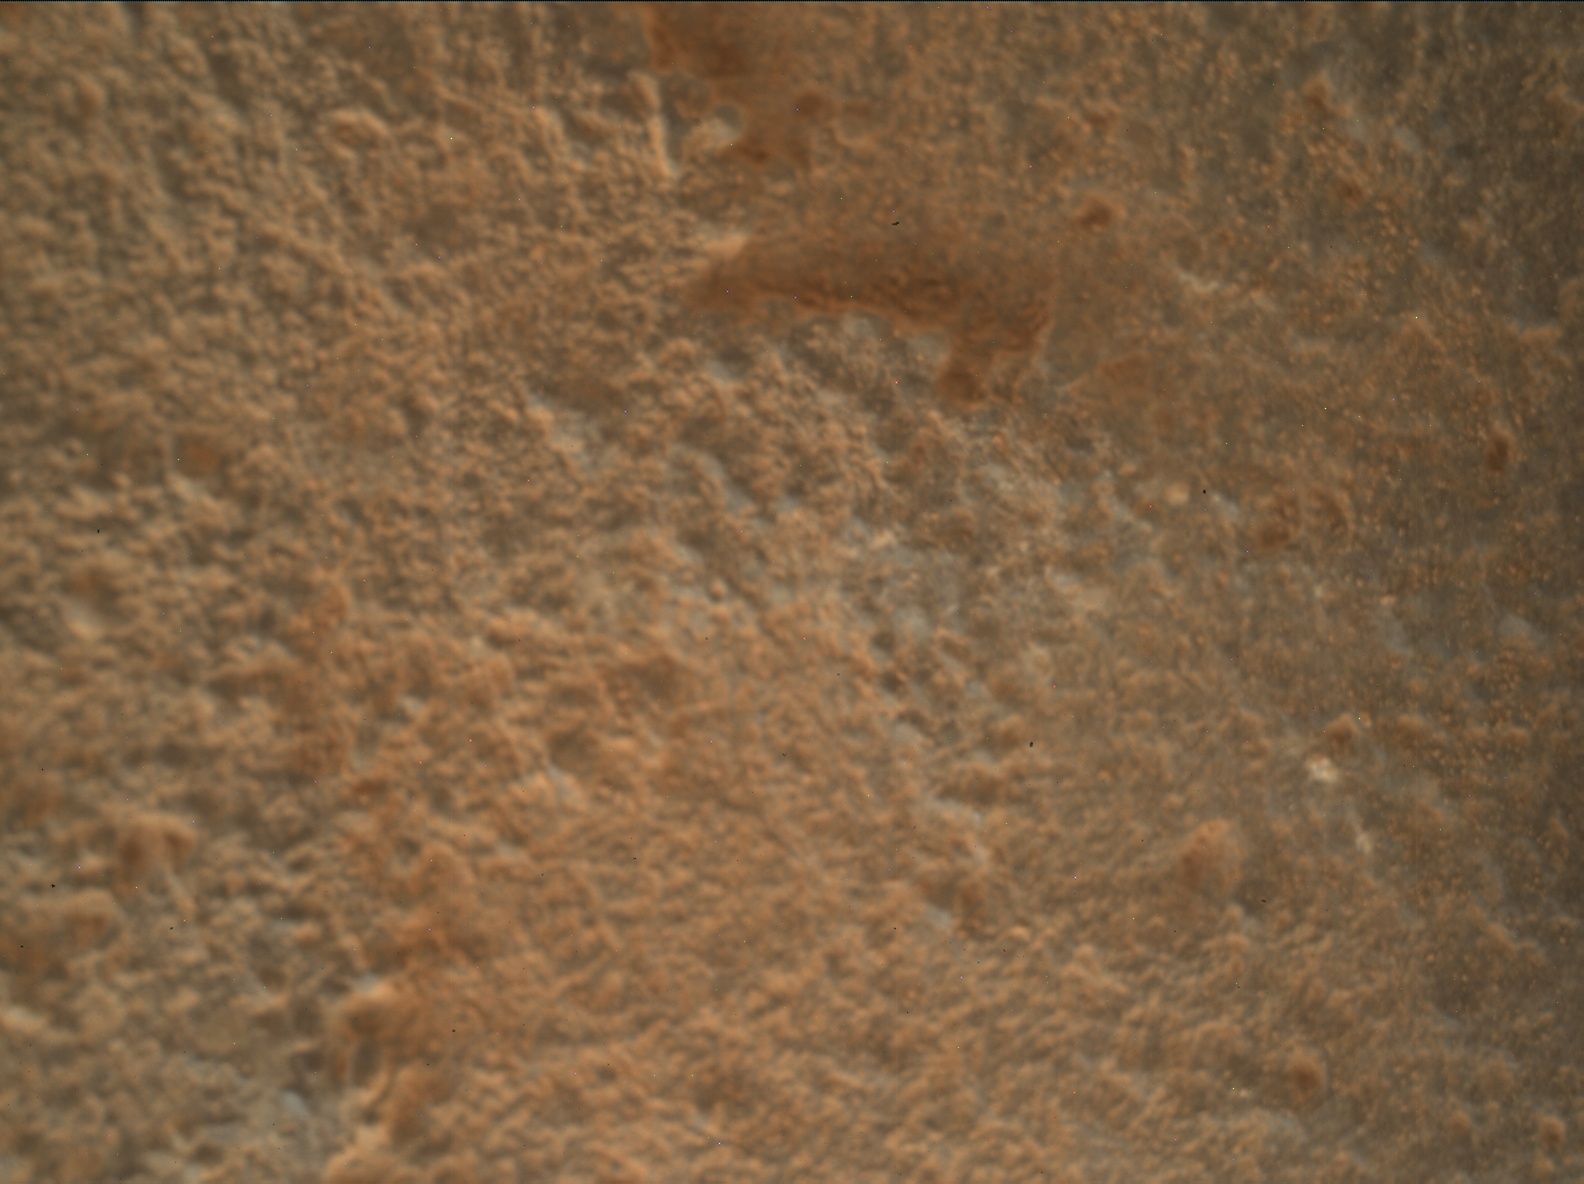 Nasa's Mars rover Curiosity acquired this image using its Mars Hand Lens Imager (MAHLI) on Sol 2706